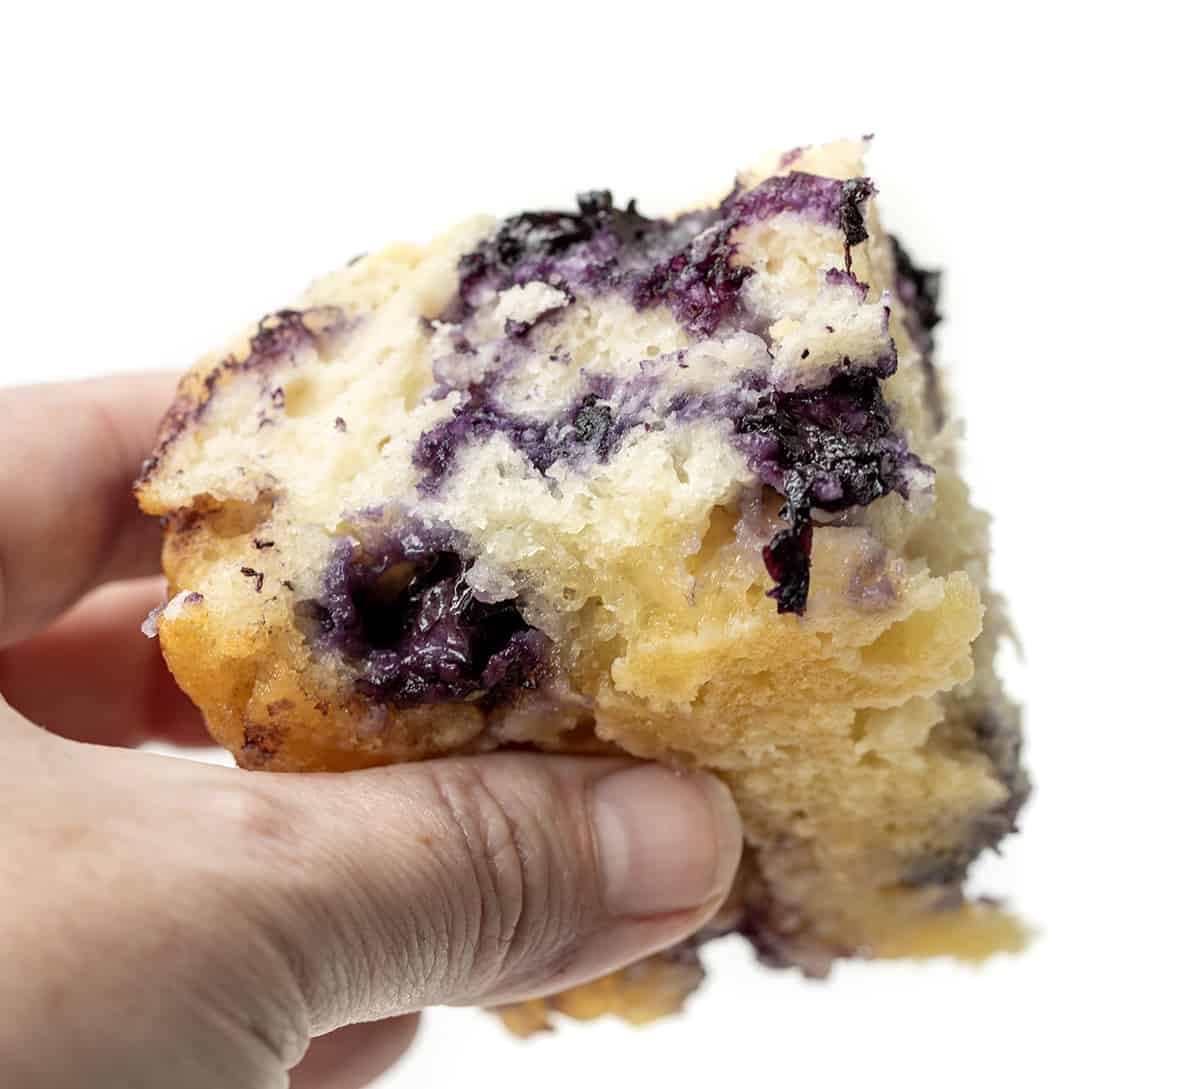 Hand Holding Blueberry Butter Swim Biscuit and Showing the Bottom Soaked in Butter.